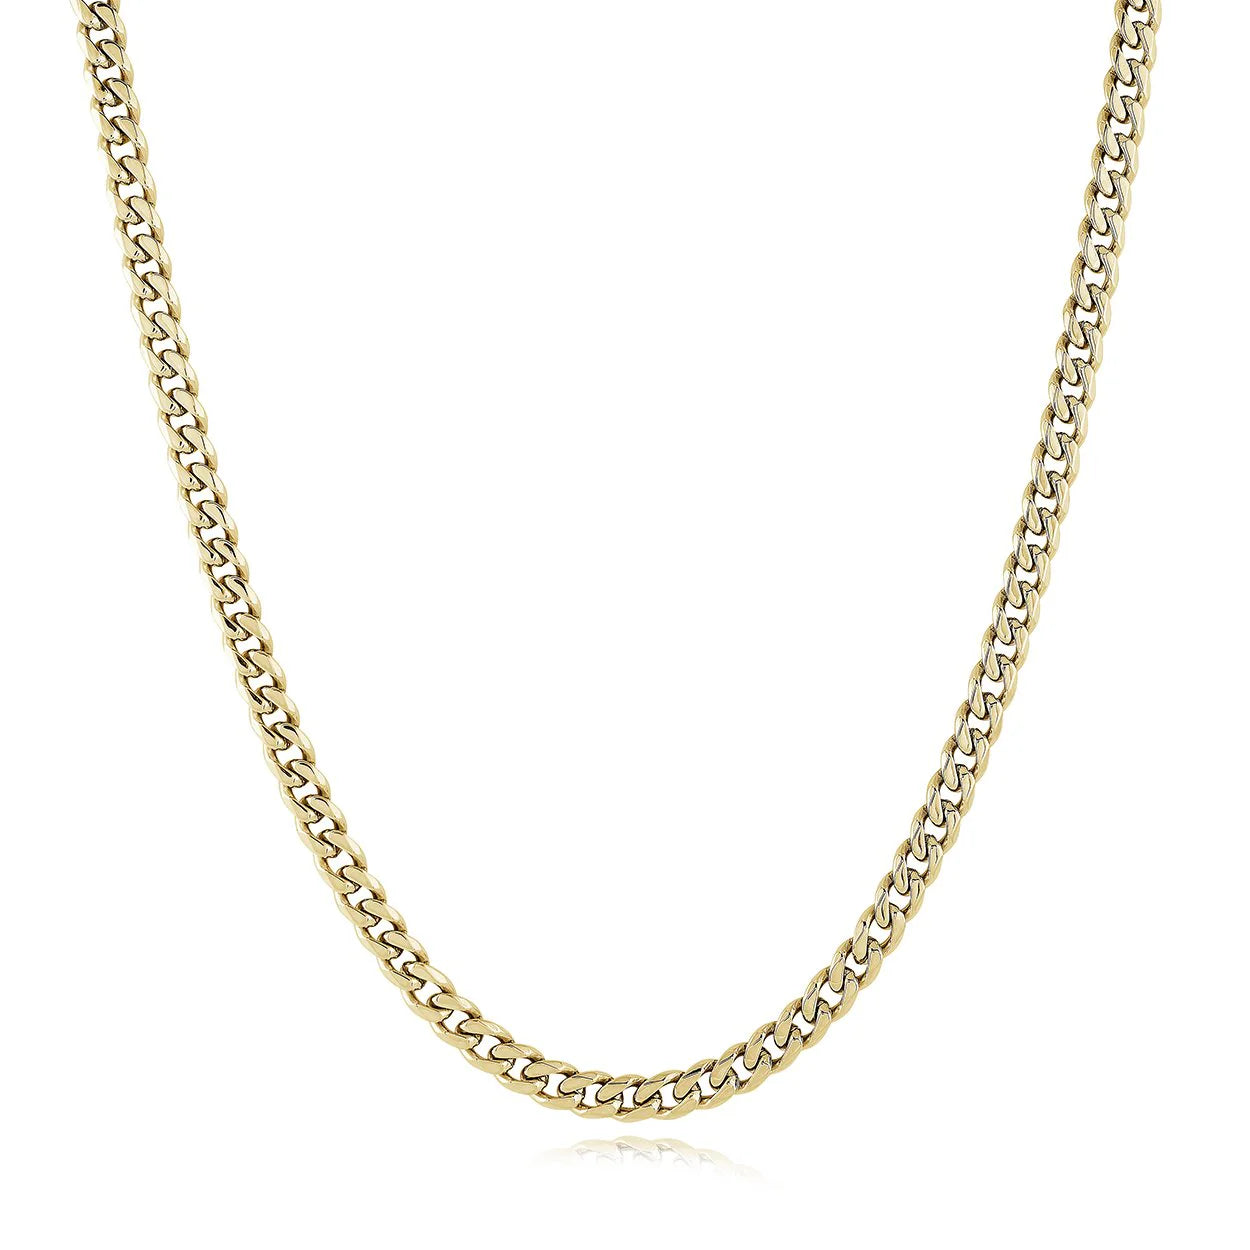 Men's Polished Curb Chain